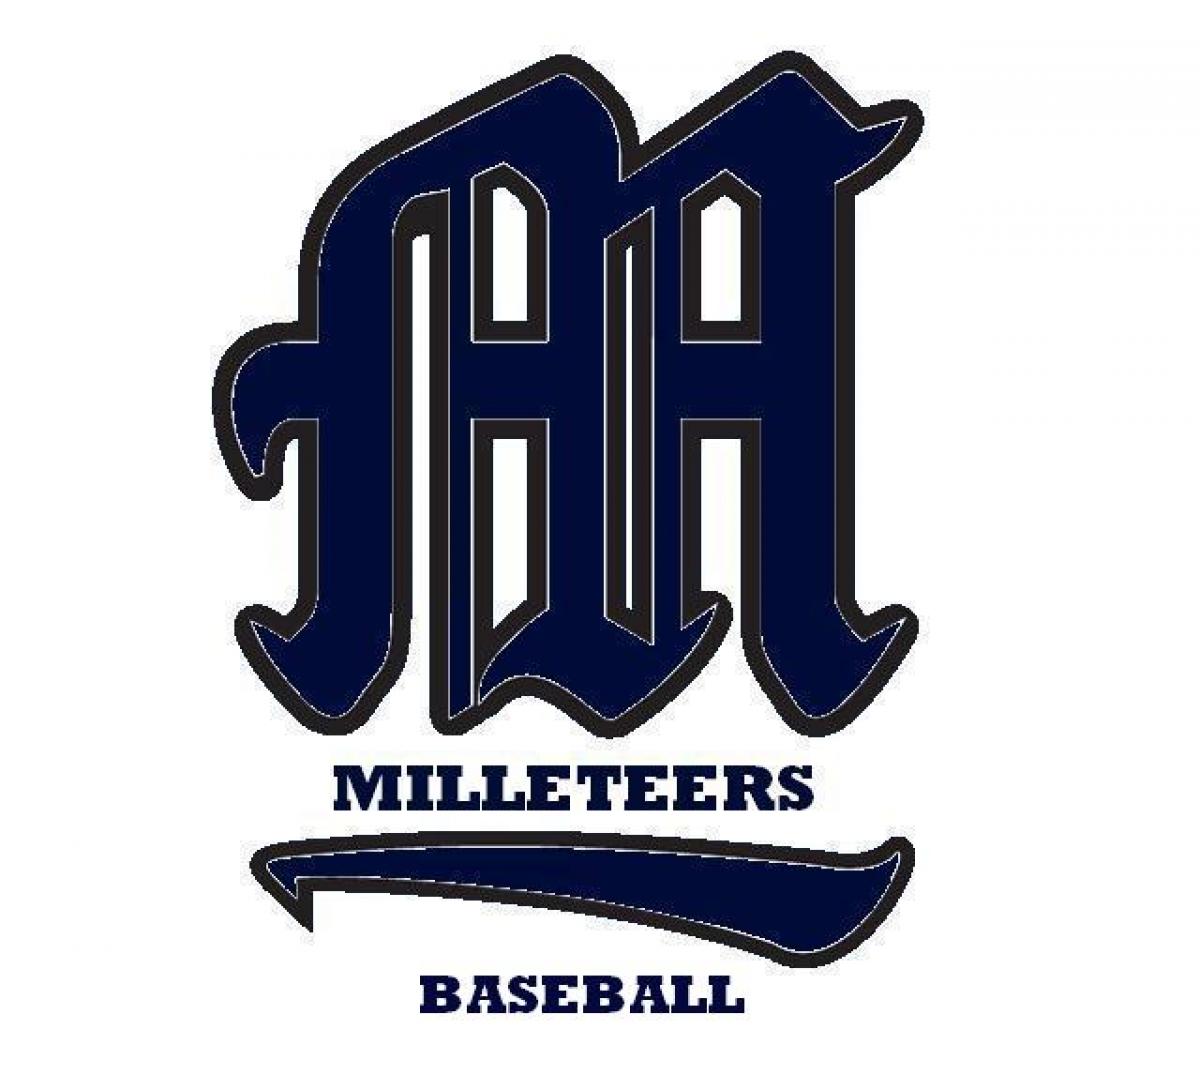 Milleteers Make It Two In A Row